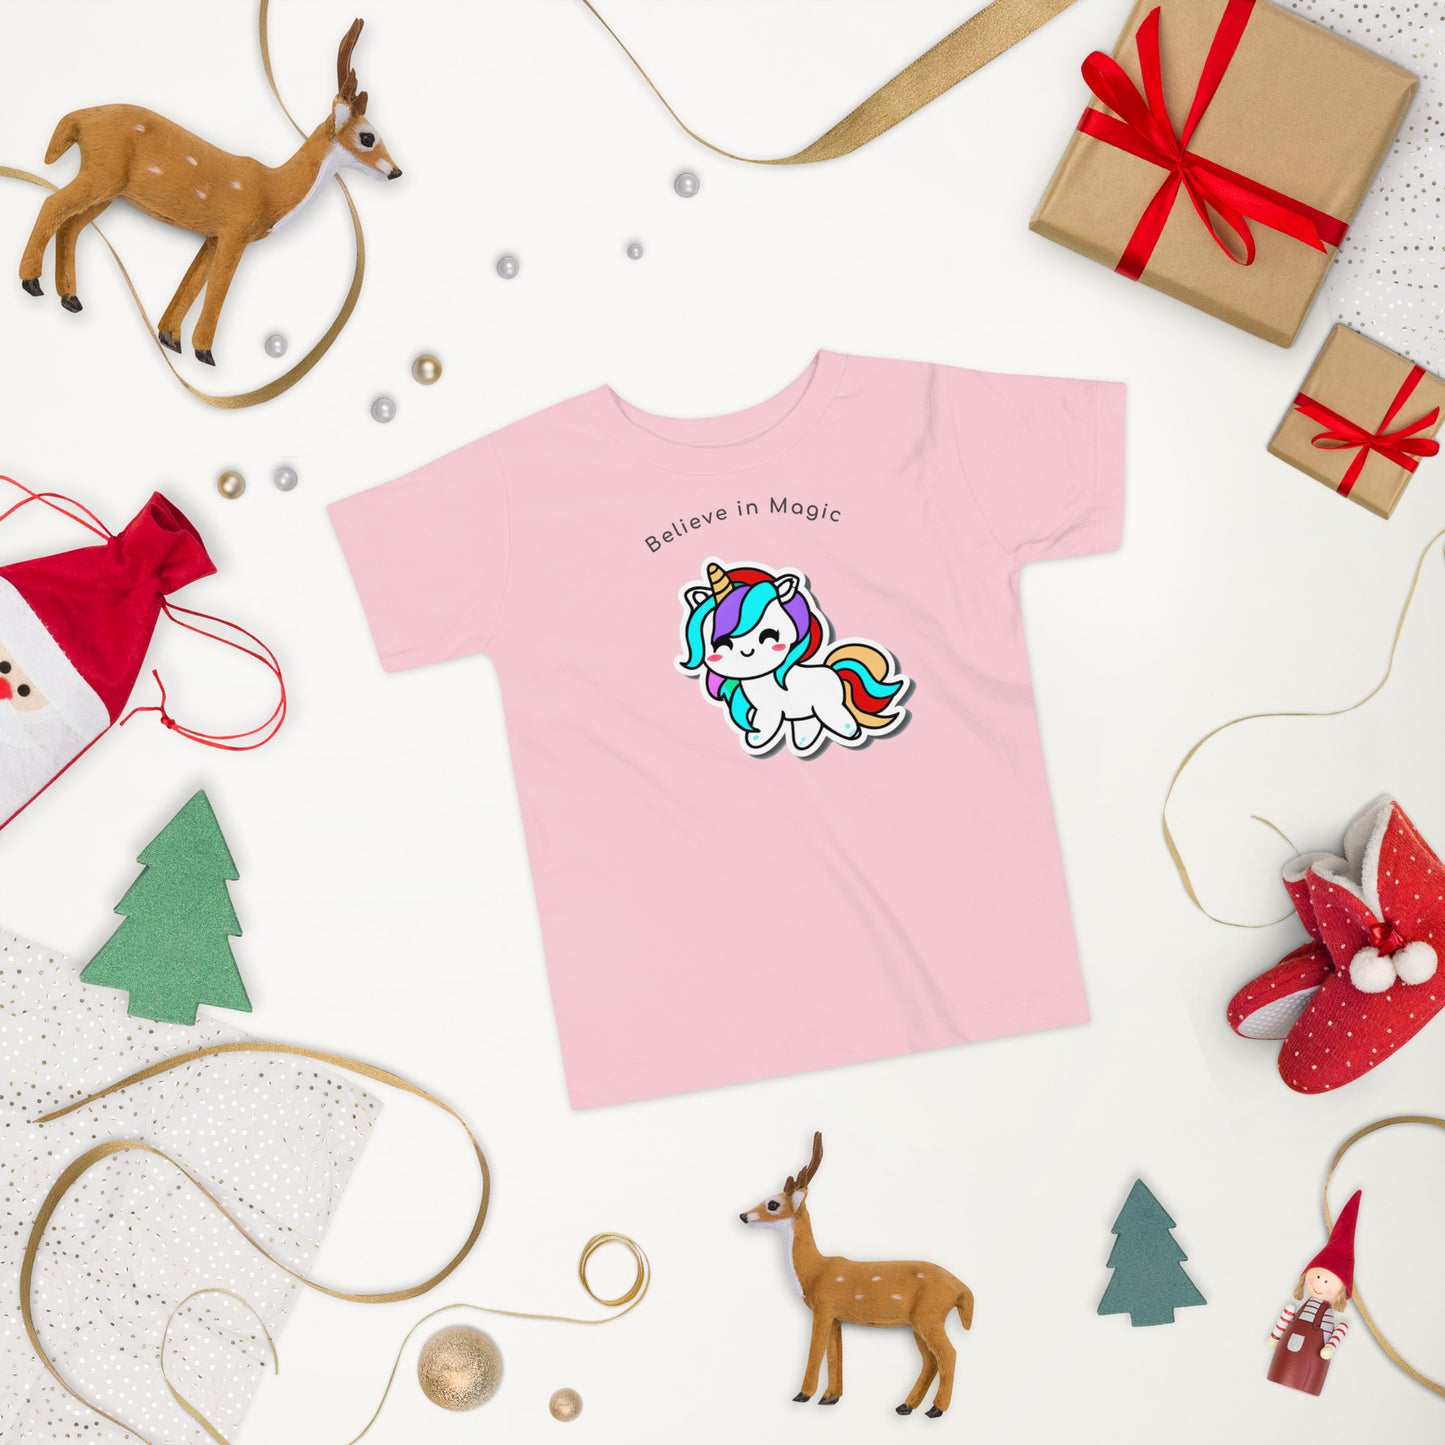 pink t-shirt with smiling and colorful unicorn laid on a white surface surrounded by Christmas items